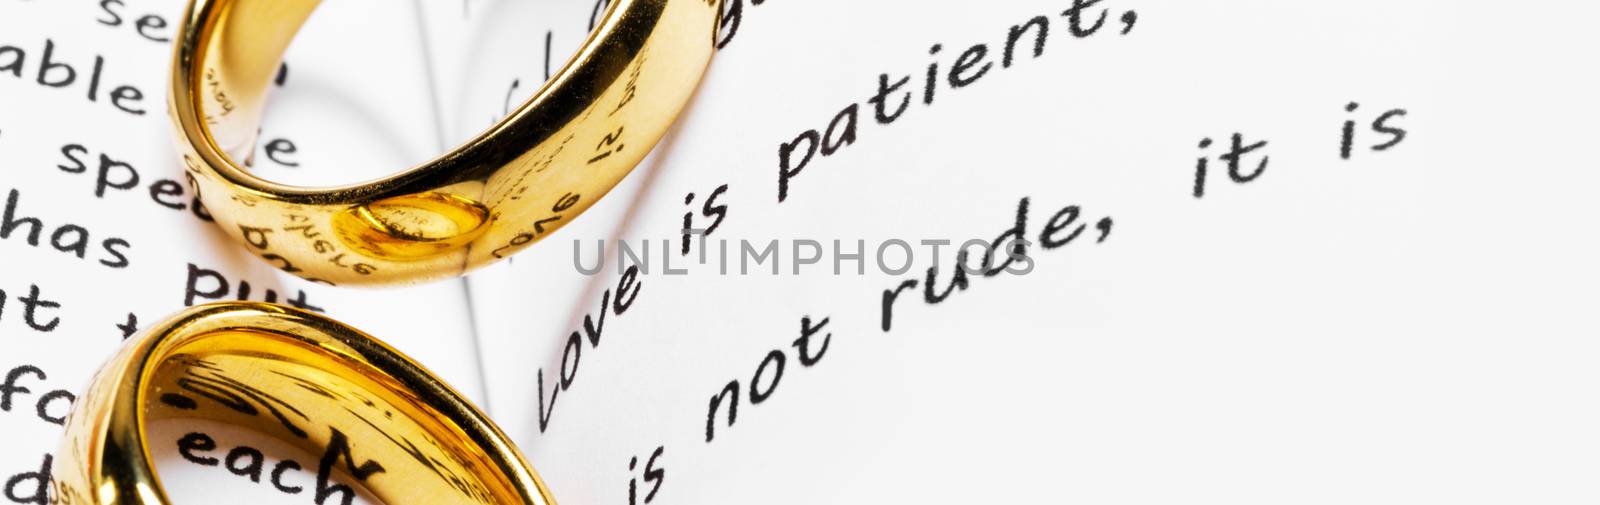 Two golden wedding rings on Holy bible book close up